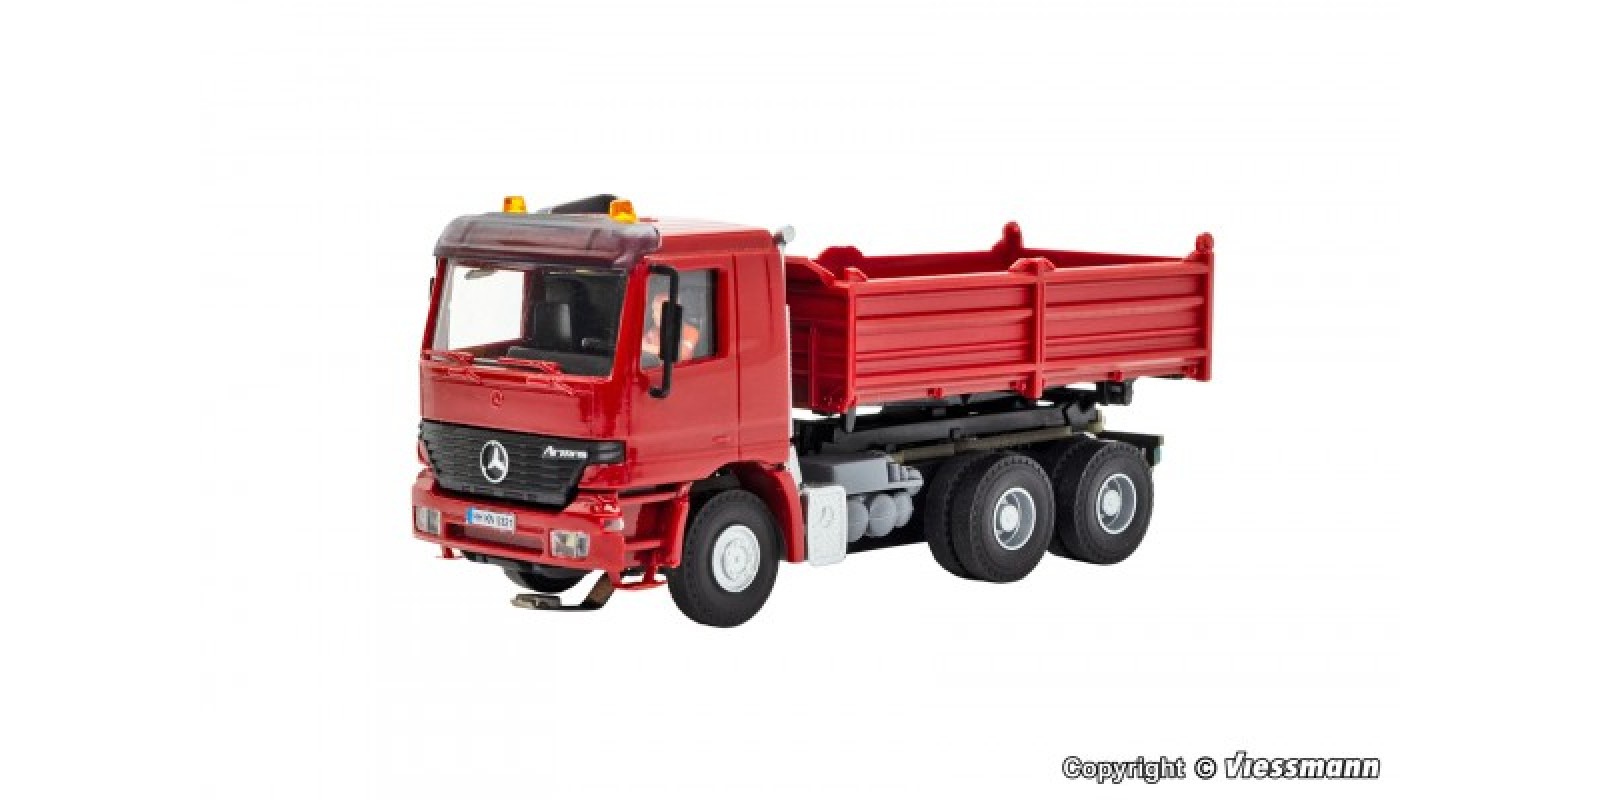 VI8014 MB ACTROS 3-axle dump truck with rotating flashing lights, red, basic, functional model